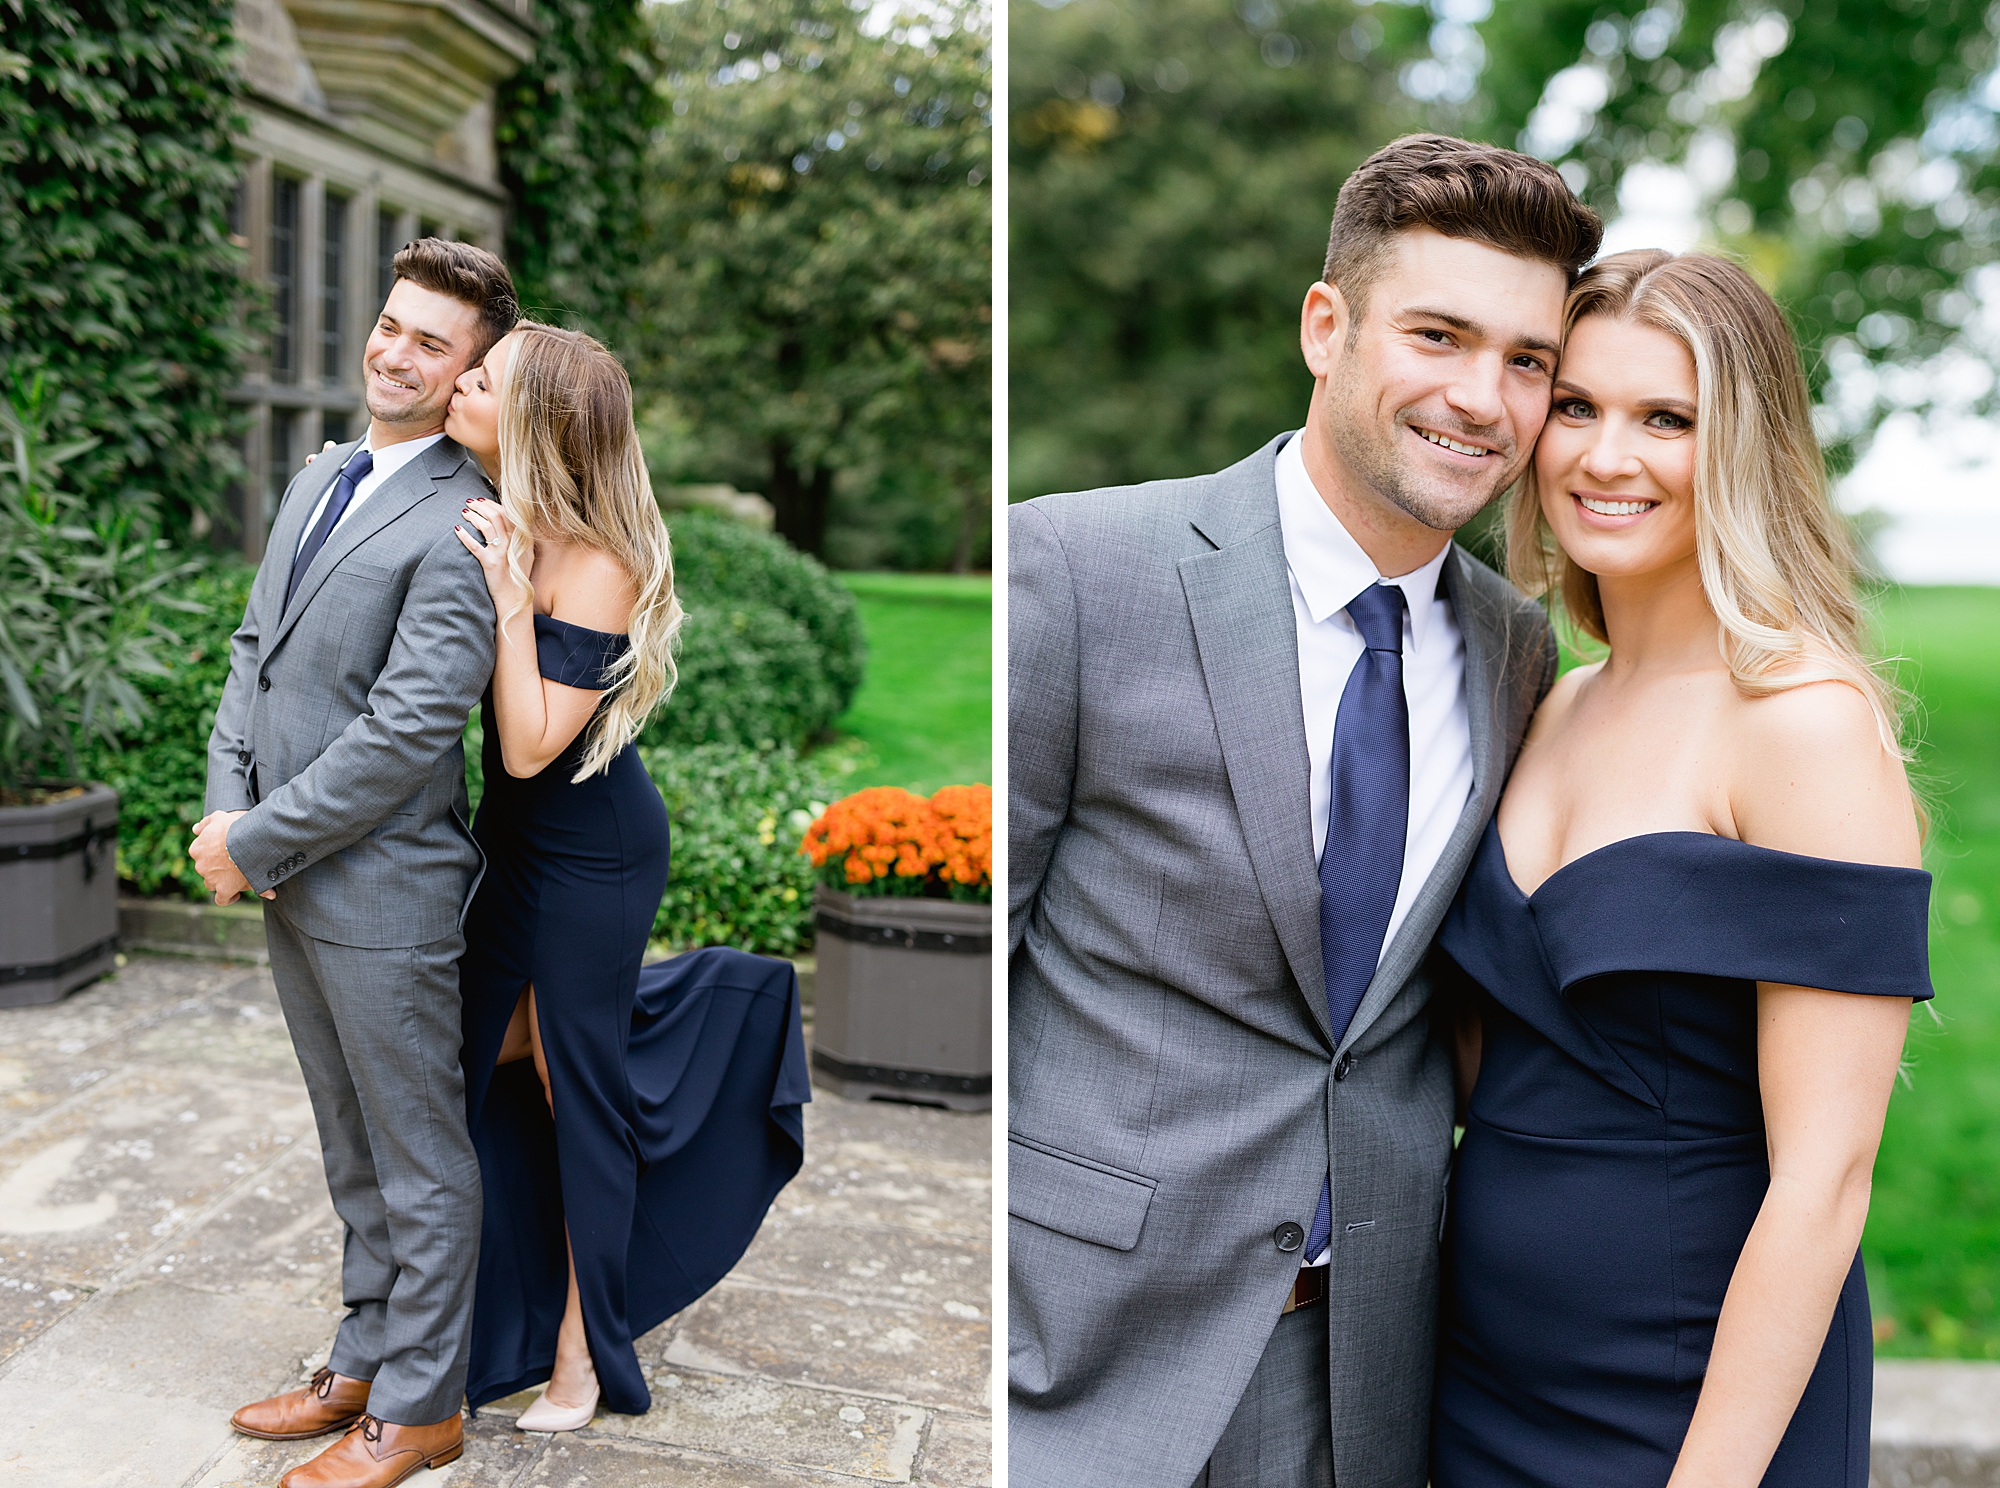 Engagement shoot formal outfit ideas | Breanne Rochelle Photography